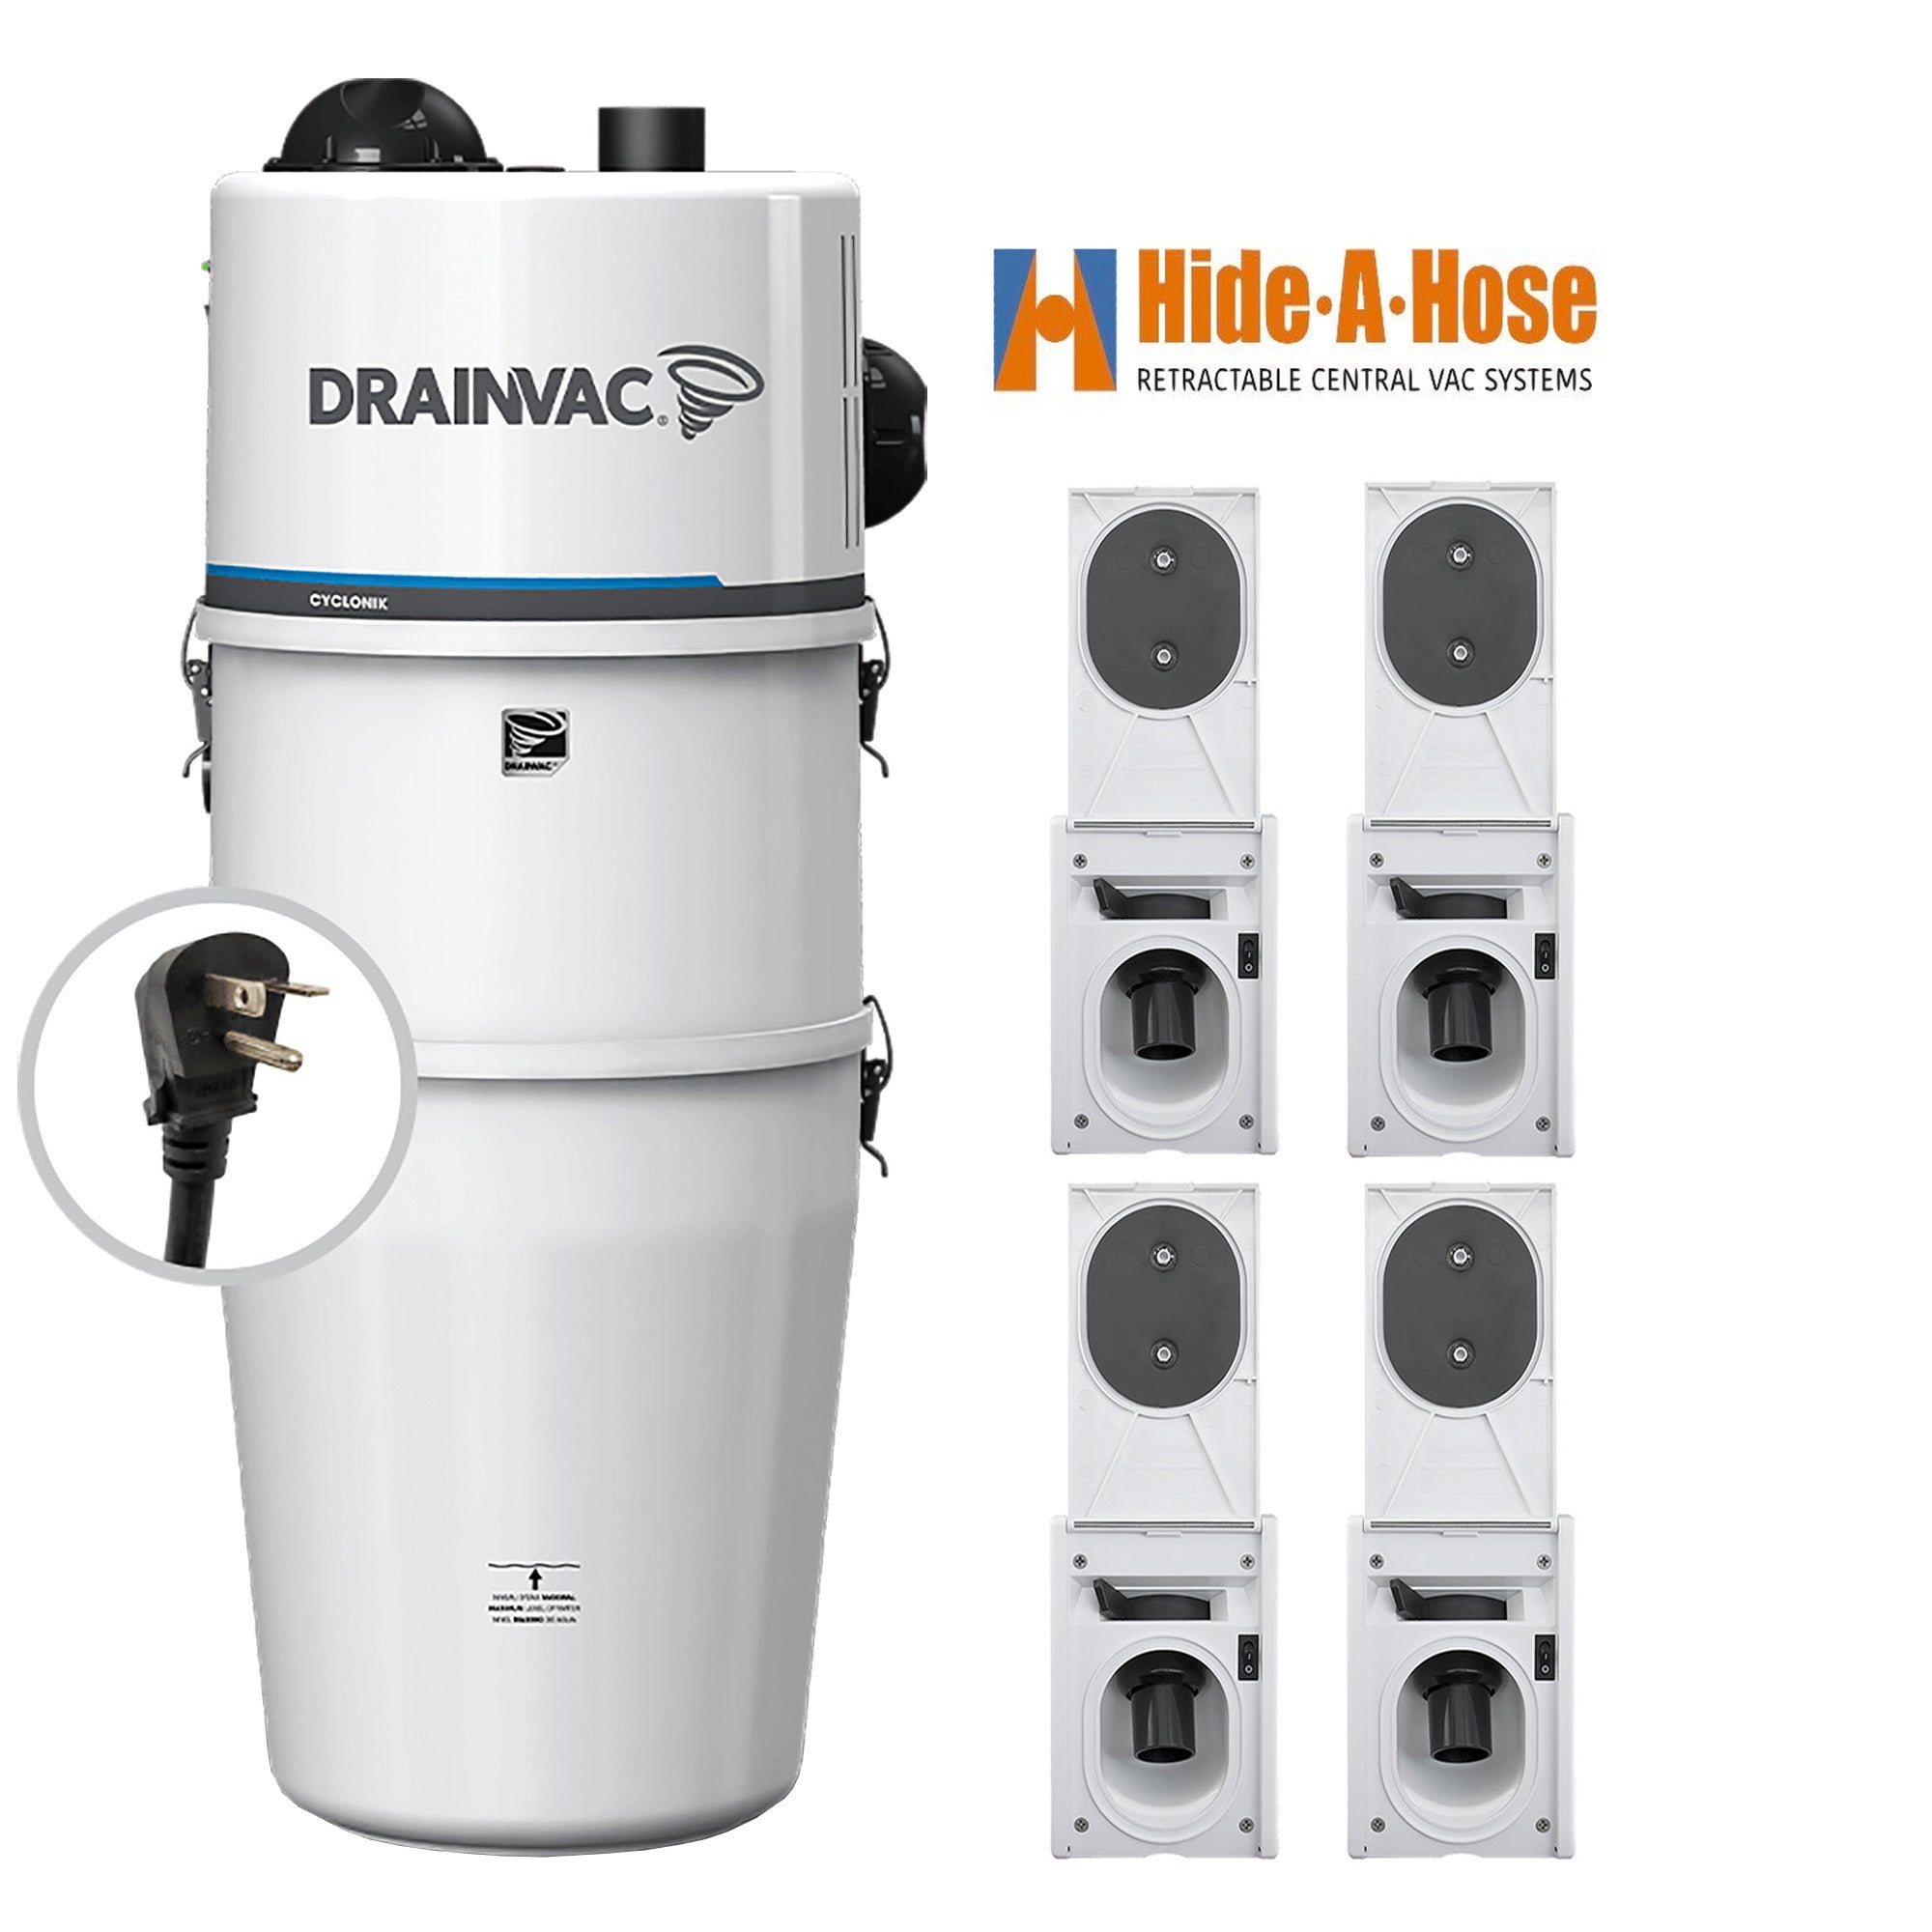 DrainVac DV1R15-CT Central Vacuum with Hide-A-Hose Complete Installation Package (4 Valves)